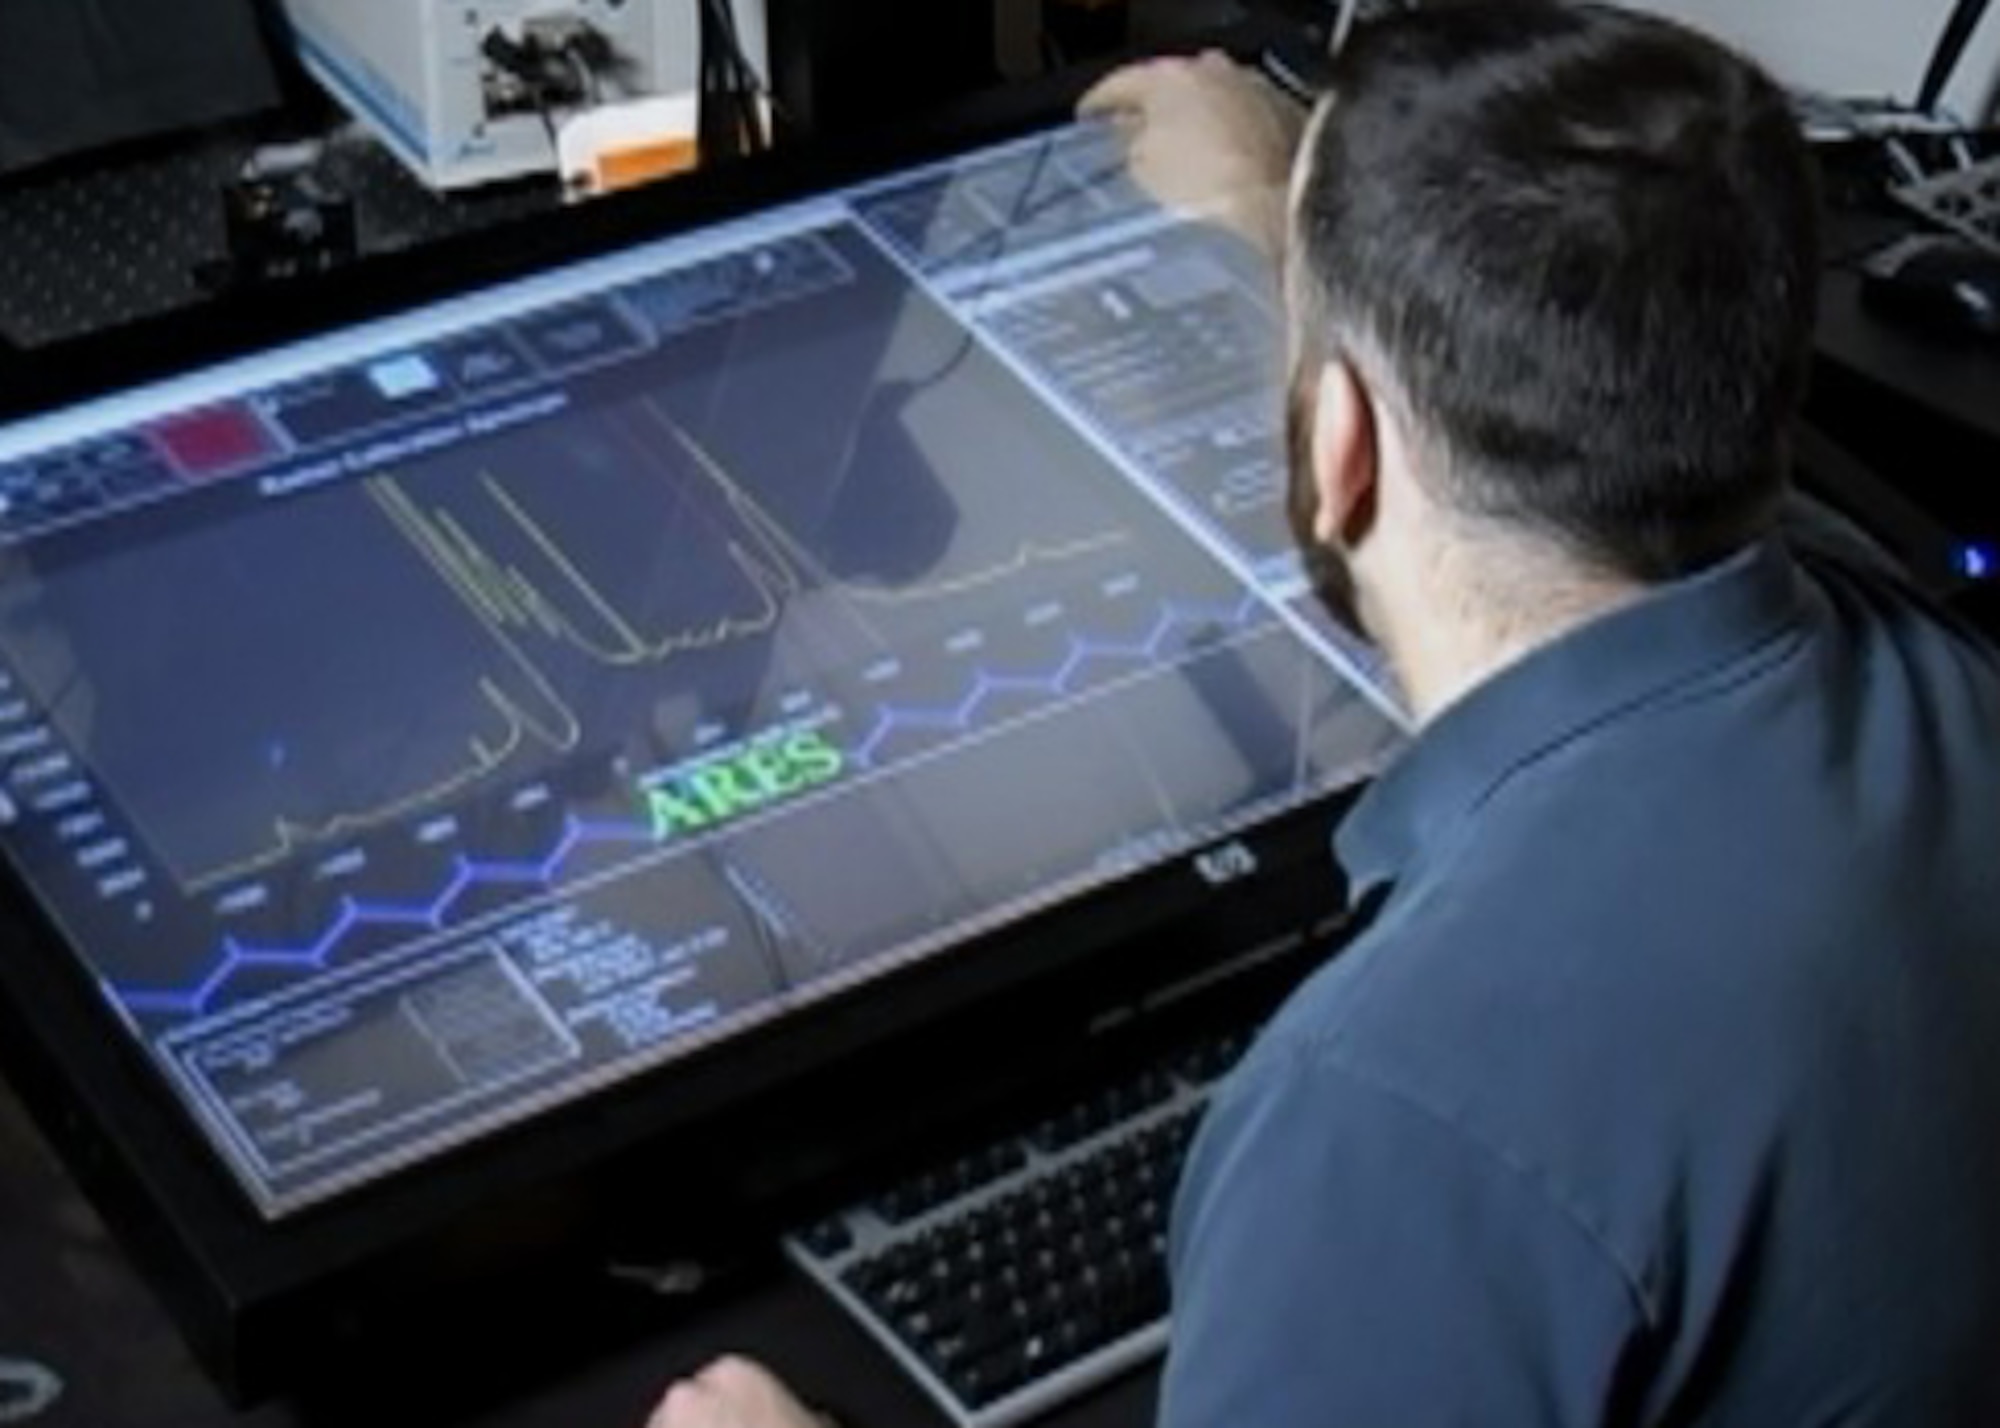 A materials researcher examines experimental data on the ARES artificial intelligence planner. The ARES Autonomous Research System, developed by the Air Force Research Laboratory, uses artificial intelligence to design, execute and analyze experiments at a faster pace than traditional scientific research methods. (Courtesy Photo)